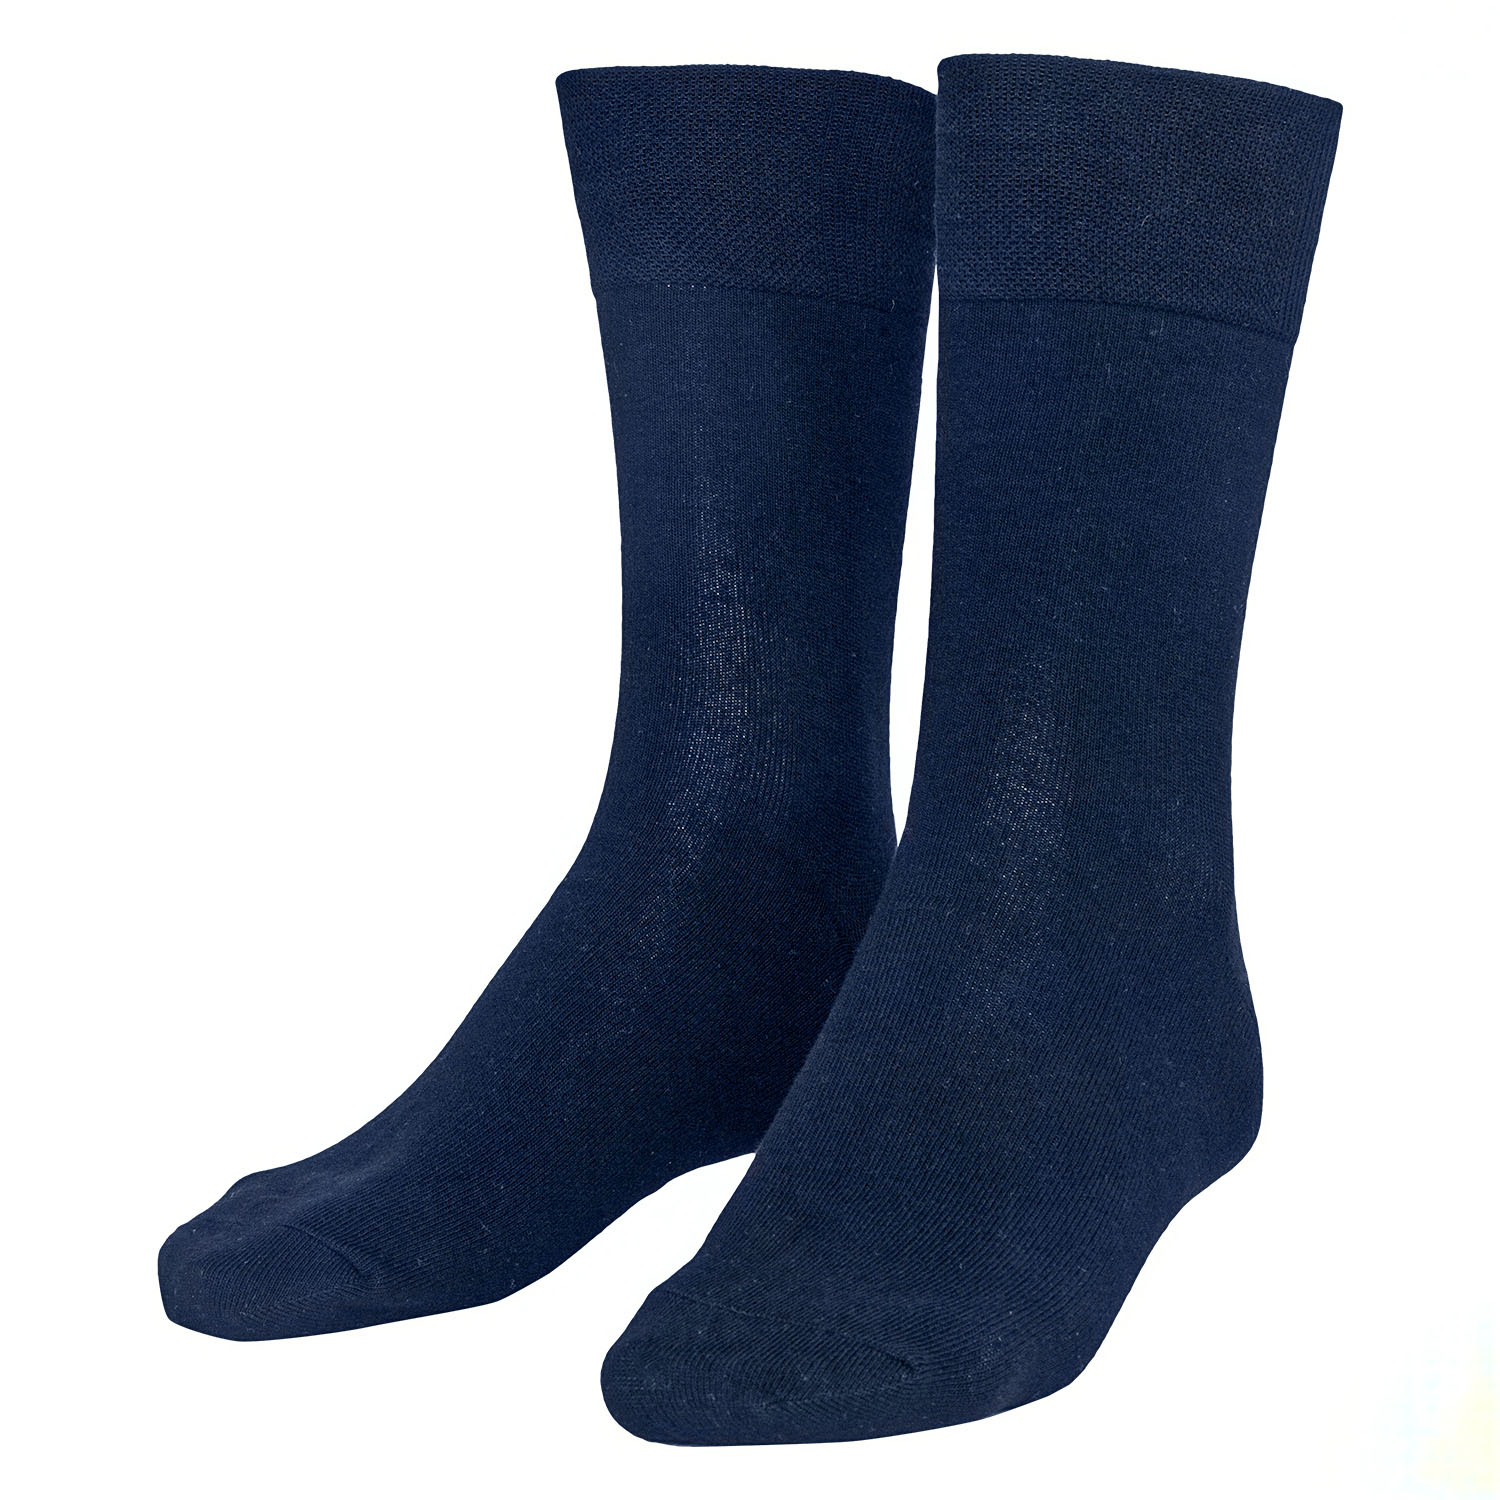 Men sock soft in navy pack of three up to size 51/54